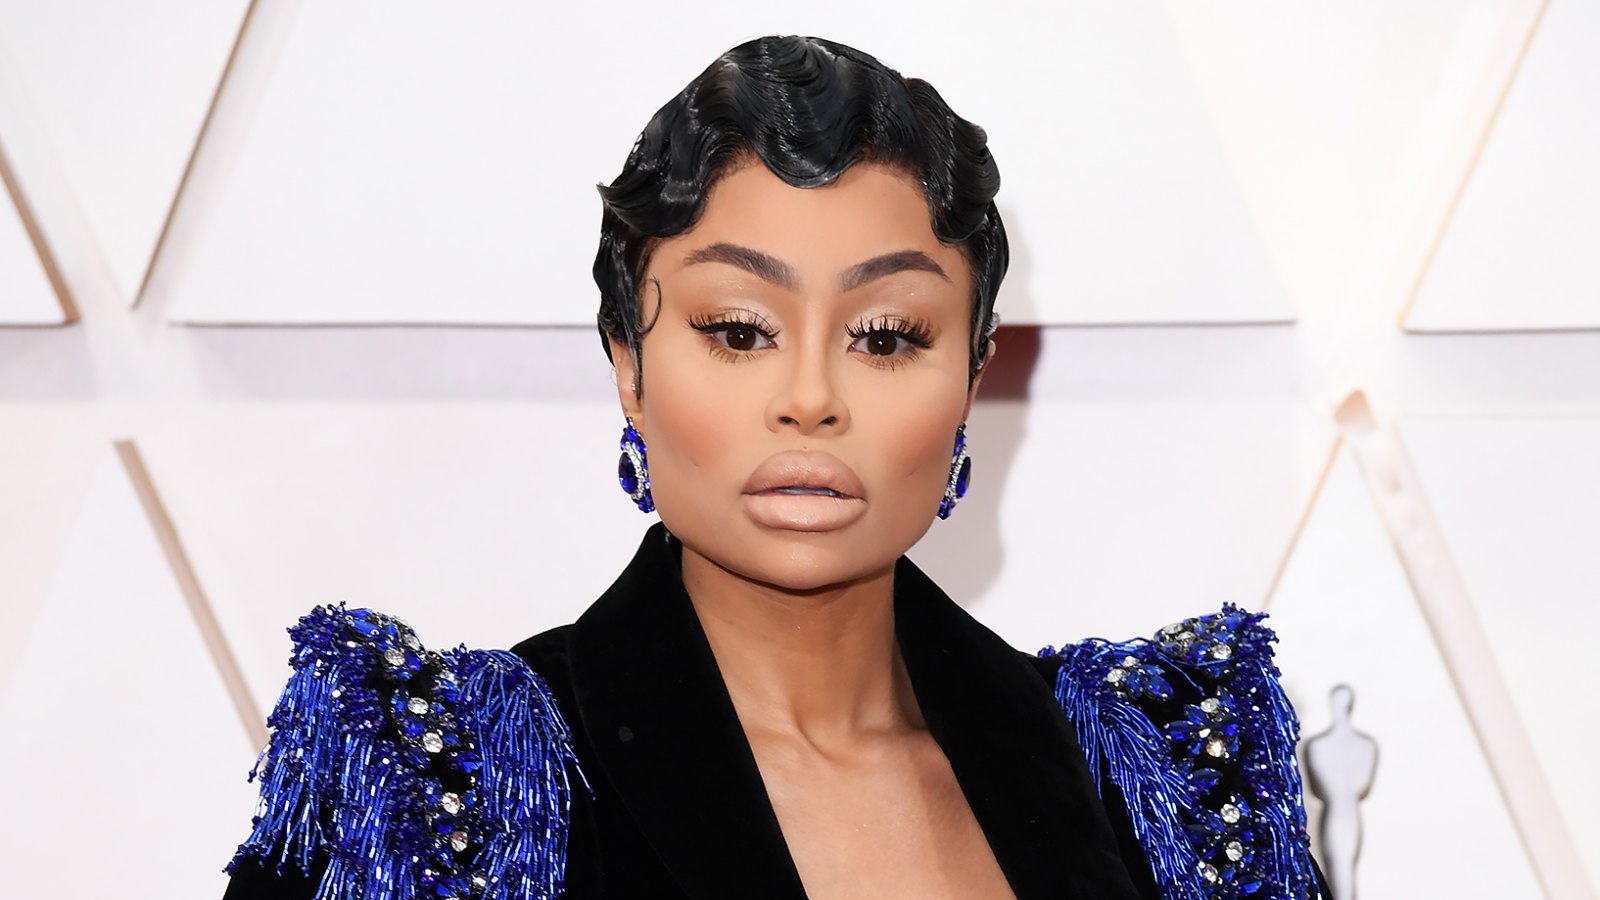 Blac Chyna Is Charging Fans $950 for FaceTime Calls